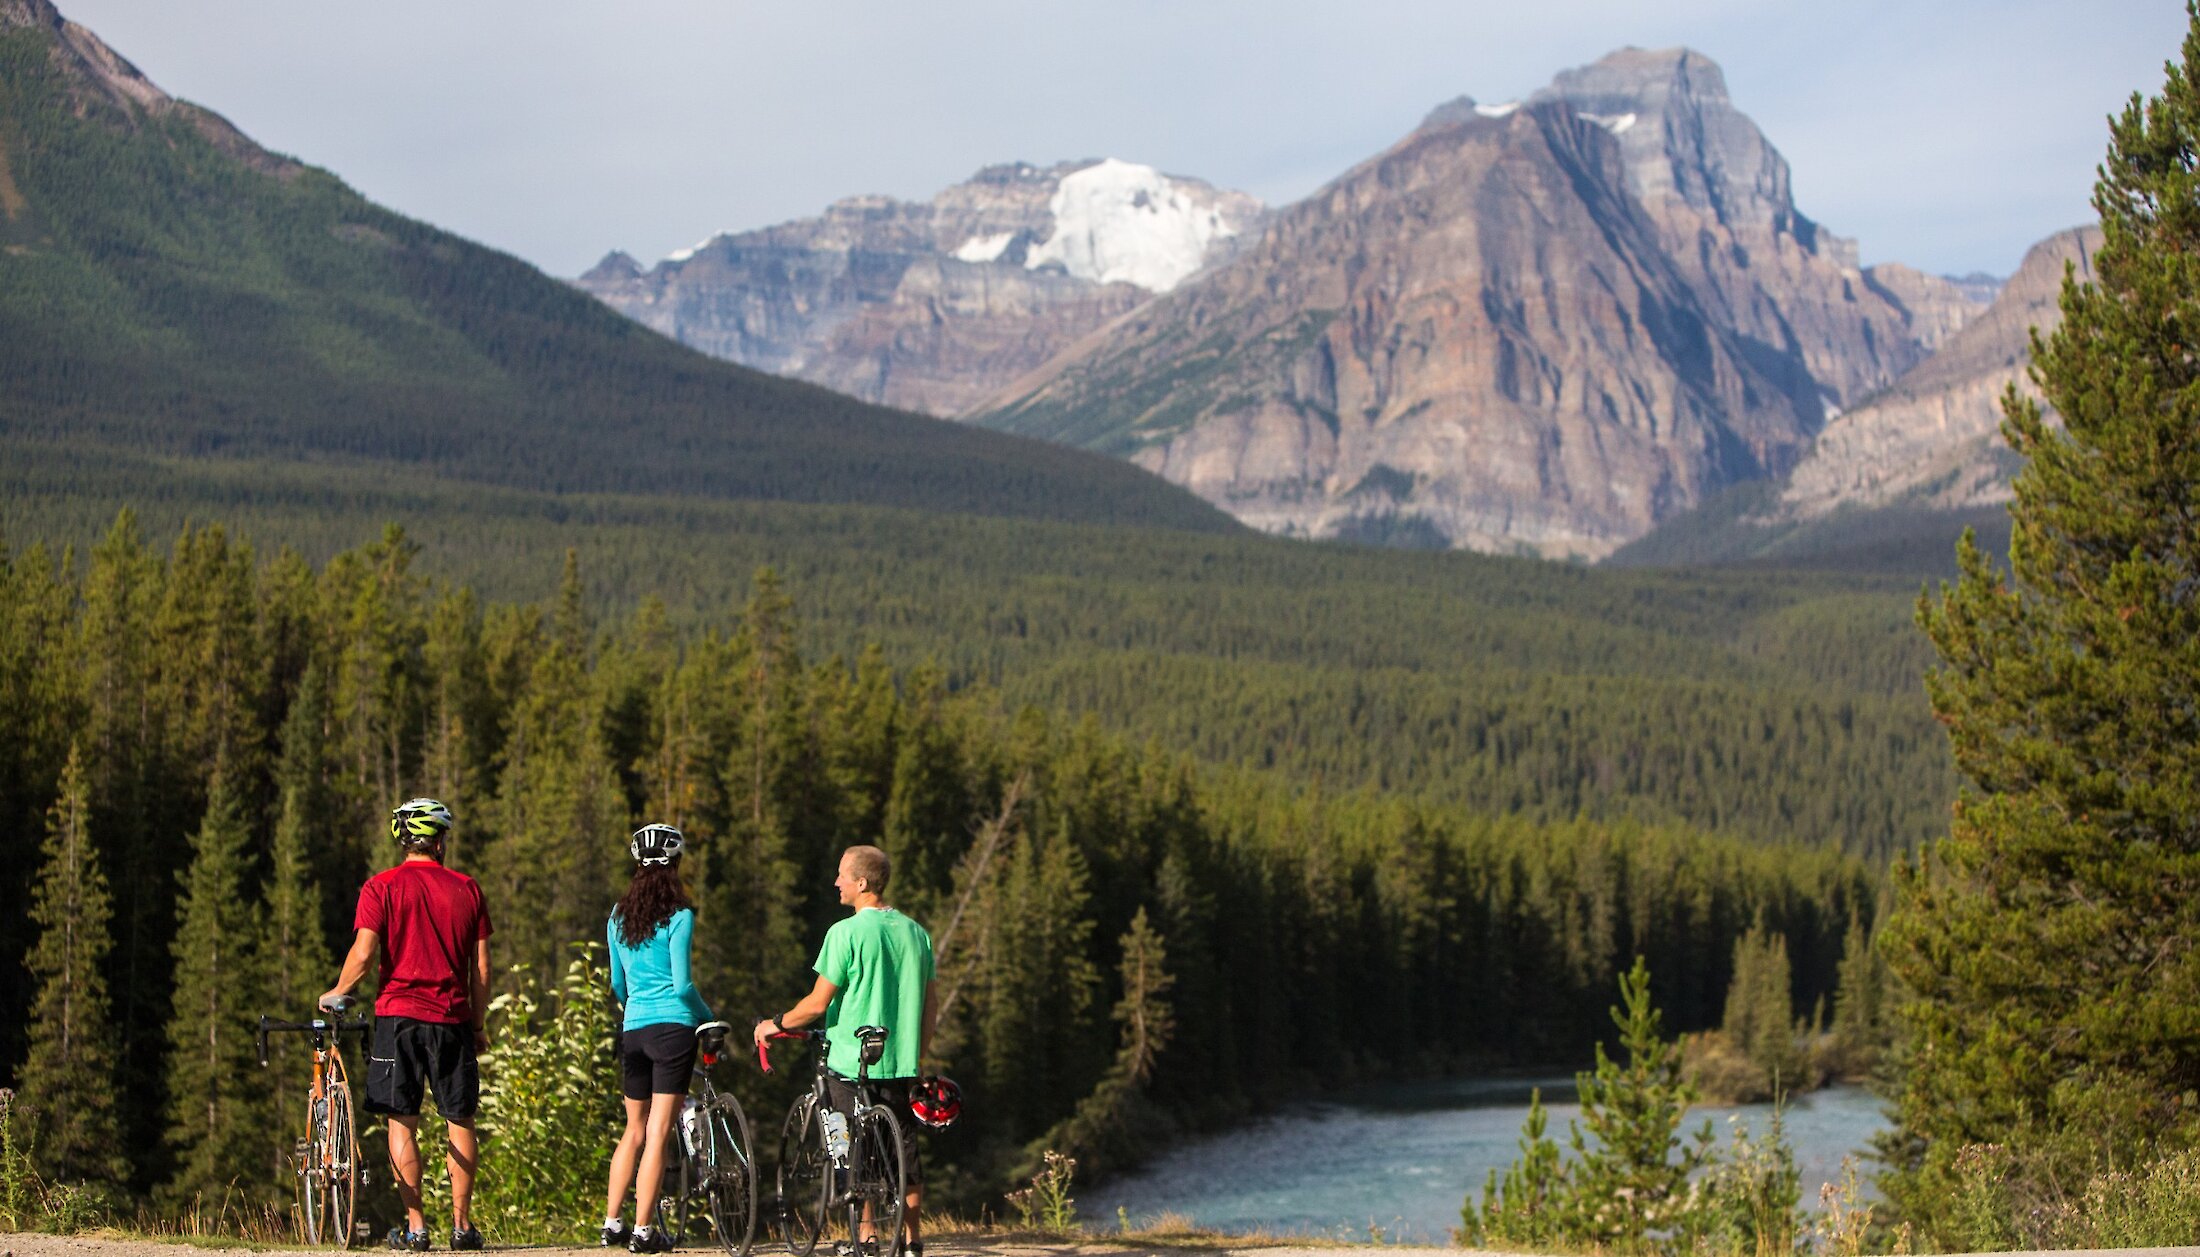 Bikers stop to check out the view during a bike ride in Banff